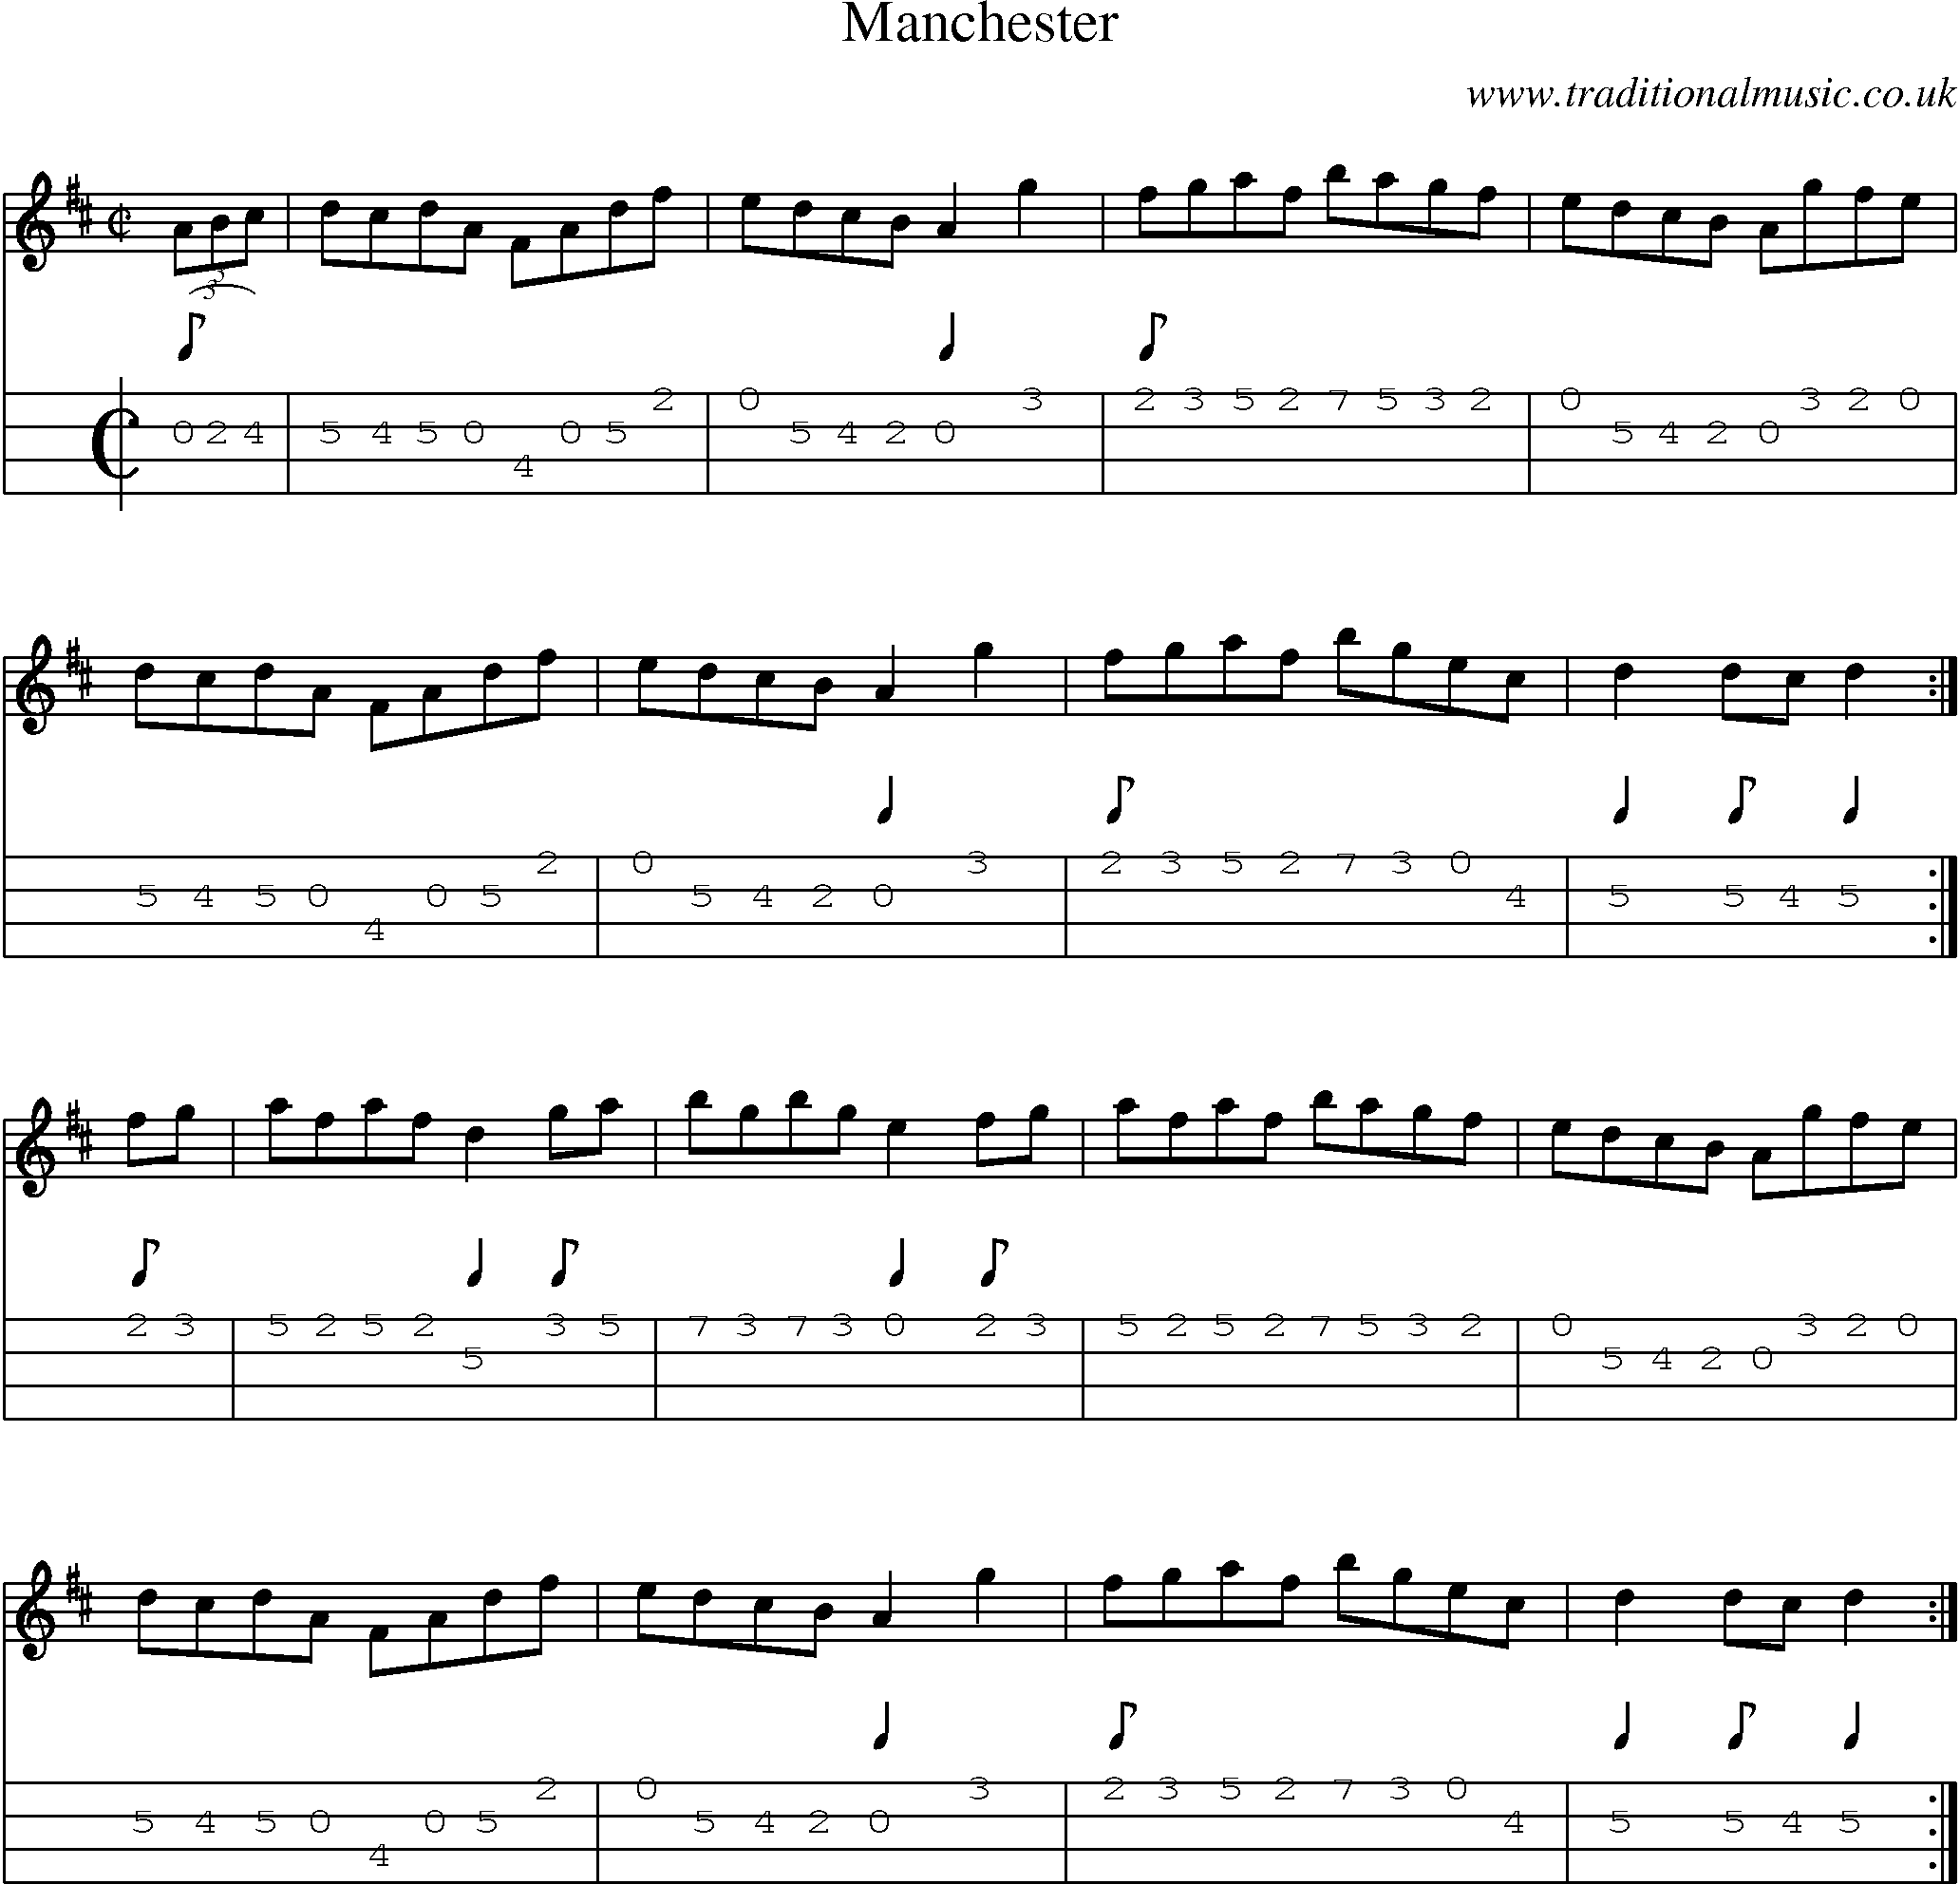 Music Score and Mandolin Tabs for Manchester